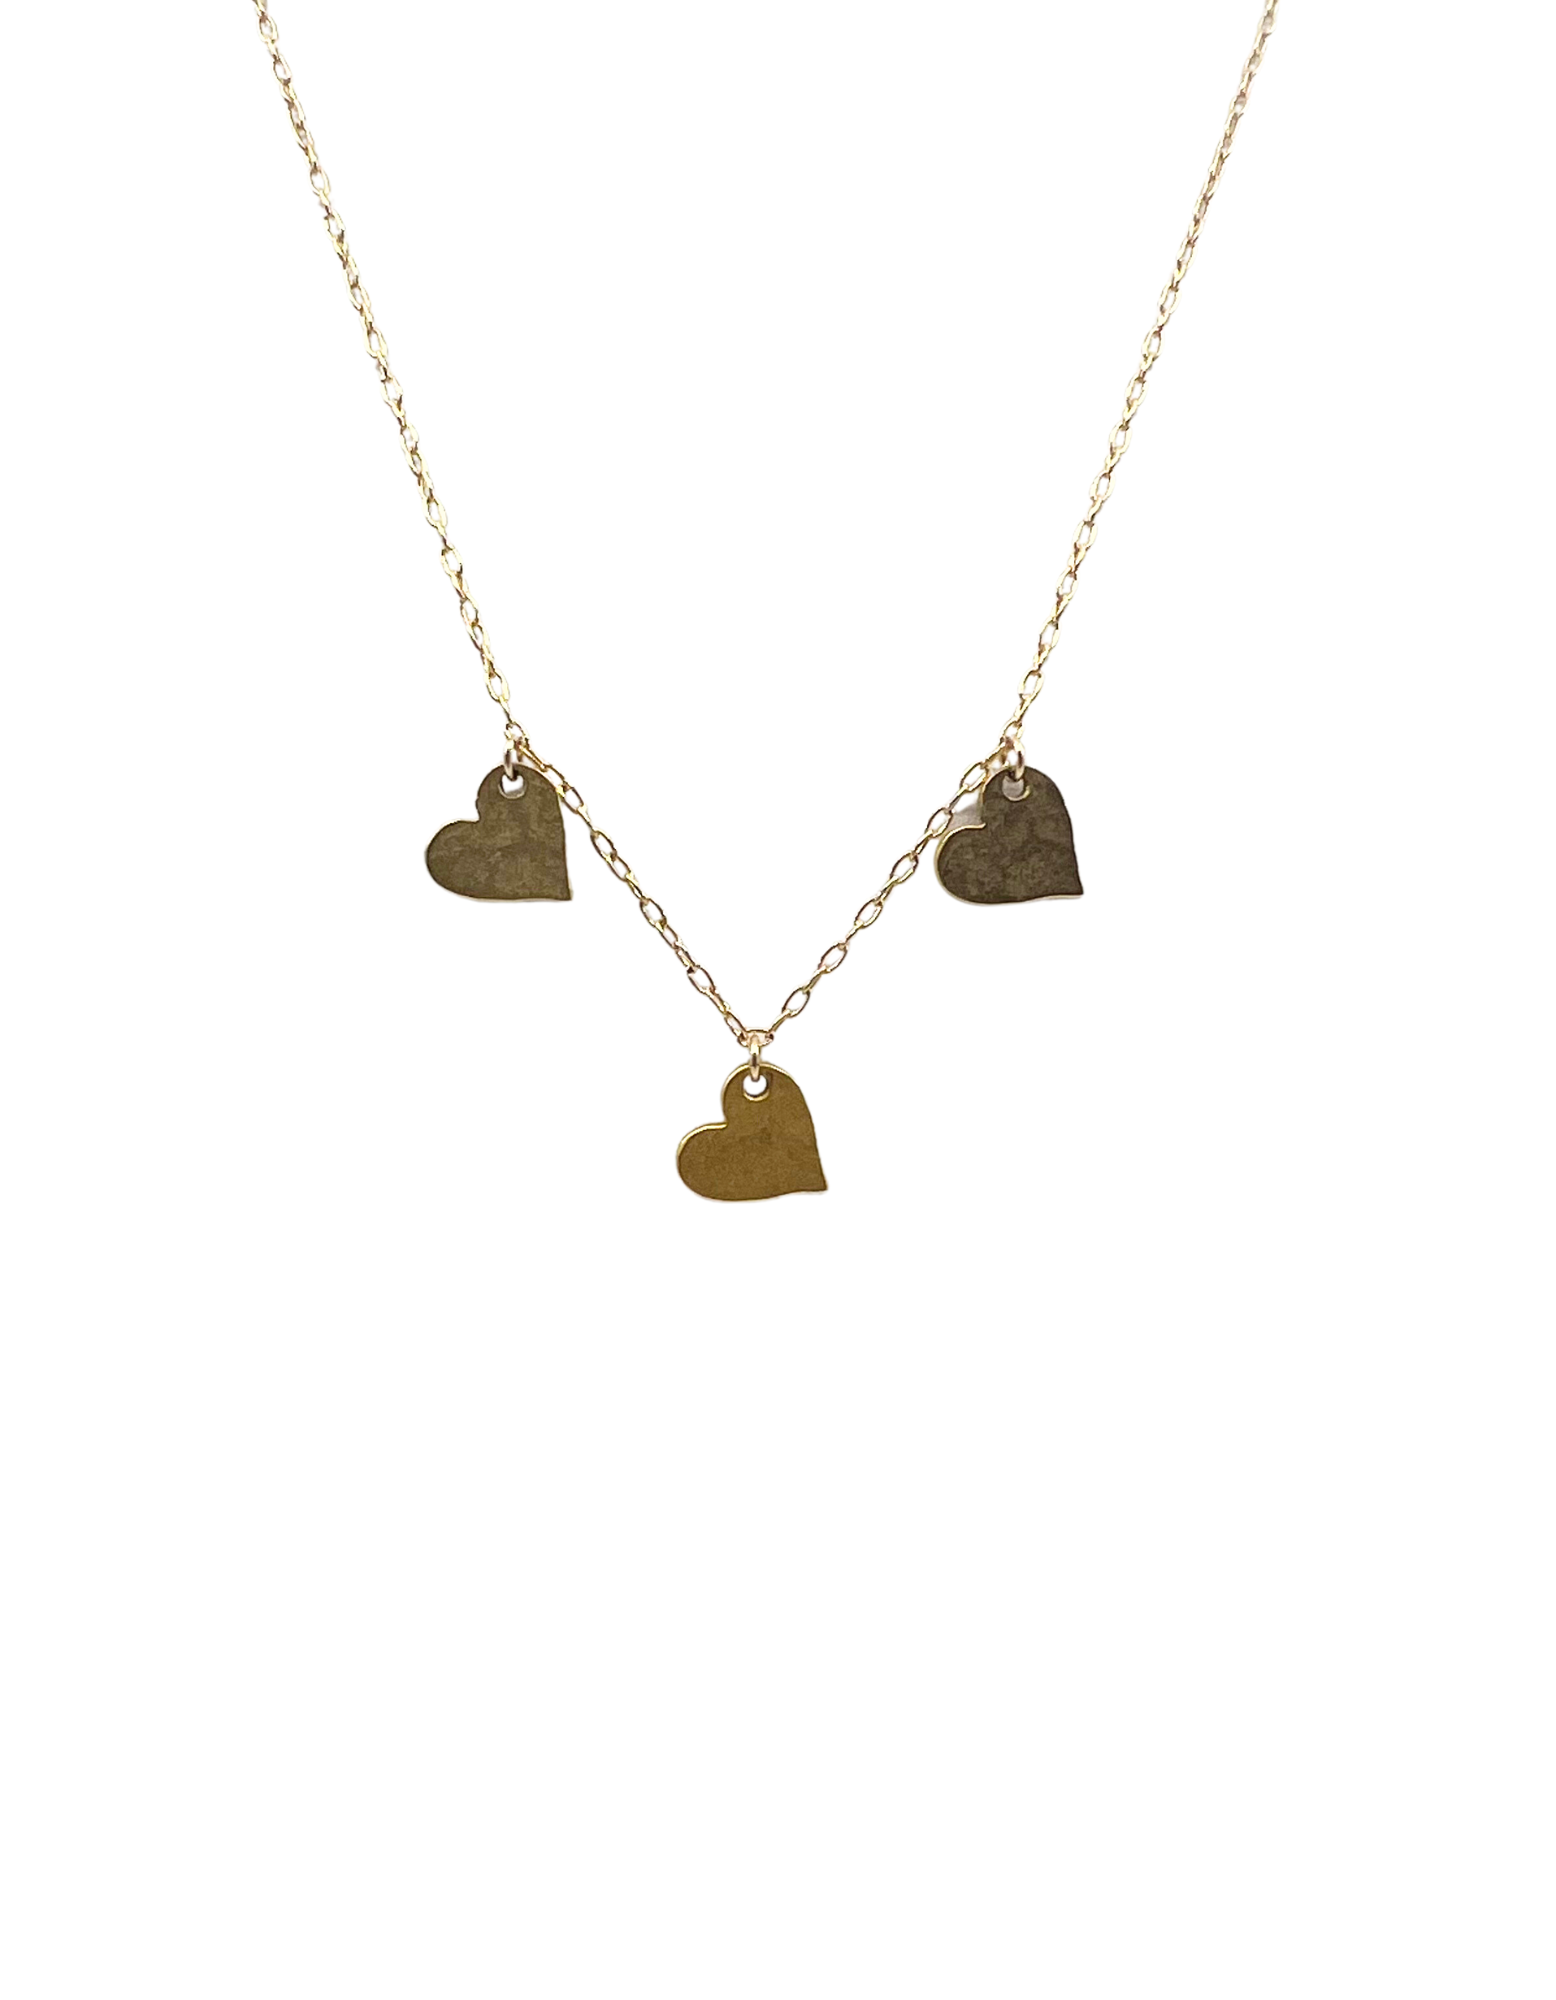 The Triple Hammered Heart Necklace